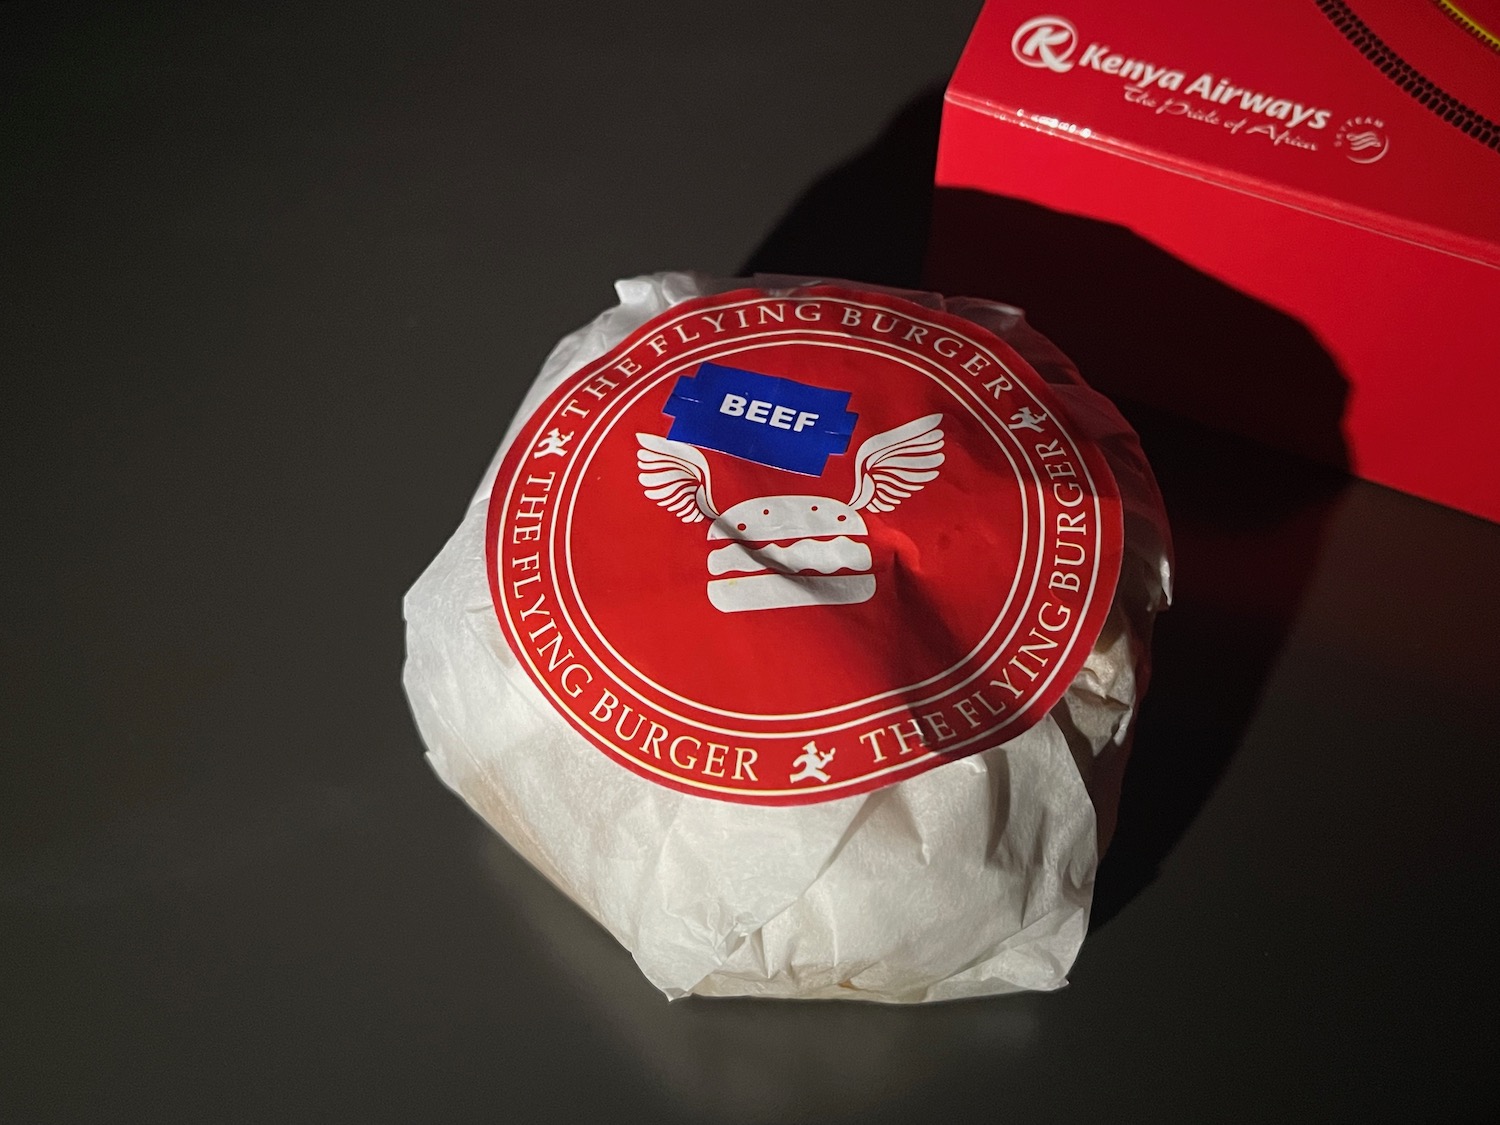 a burger wrapped in paper and a red box